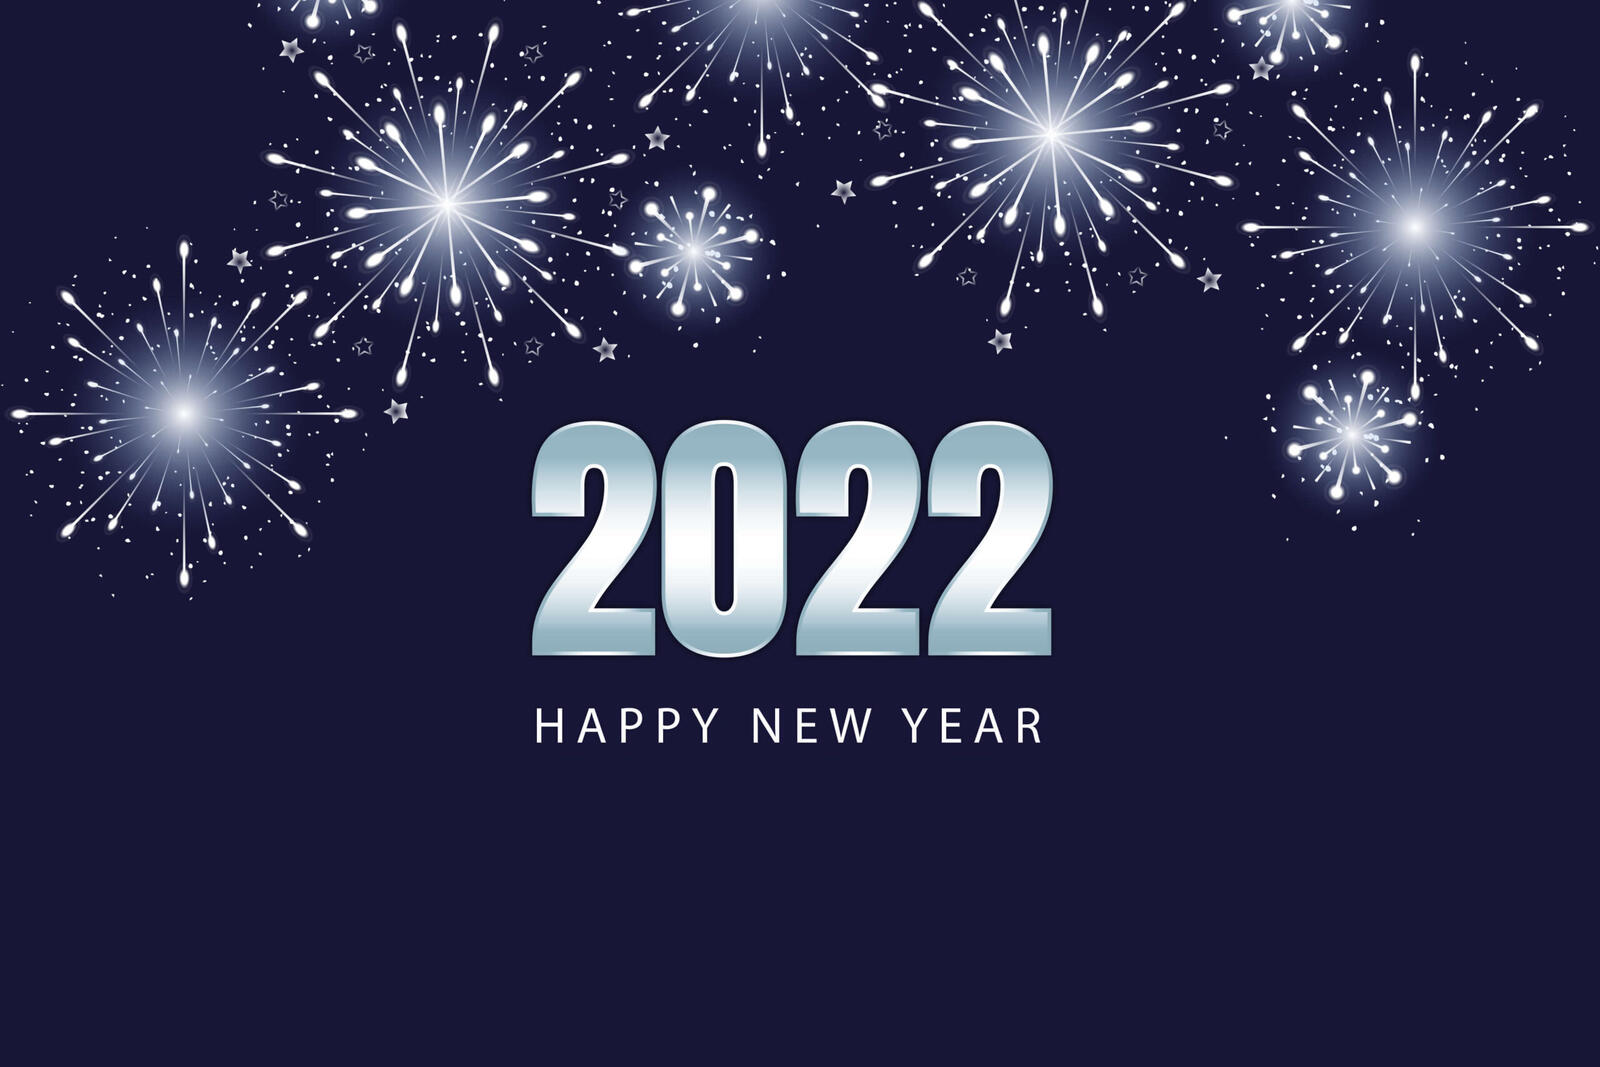 Wallpapers 2022 new year 2022 salute on the desktop